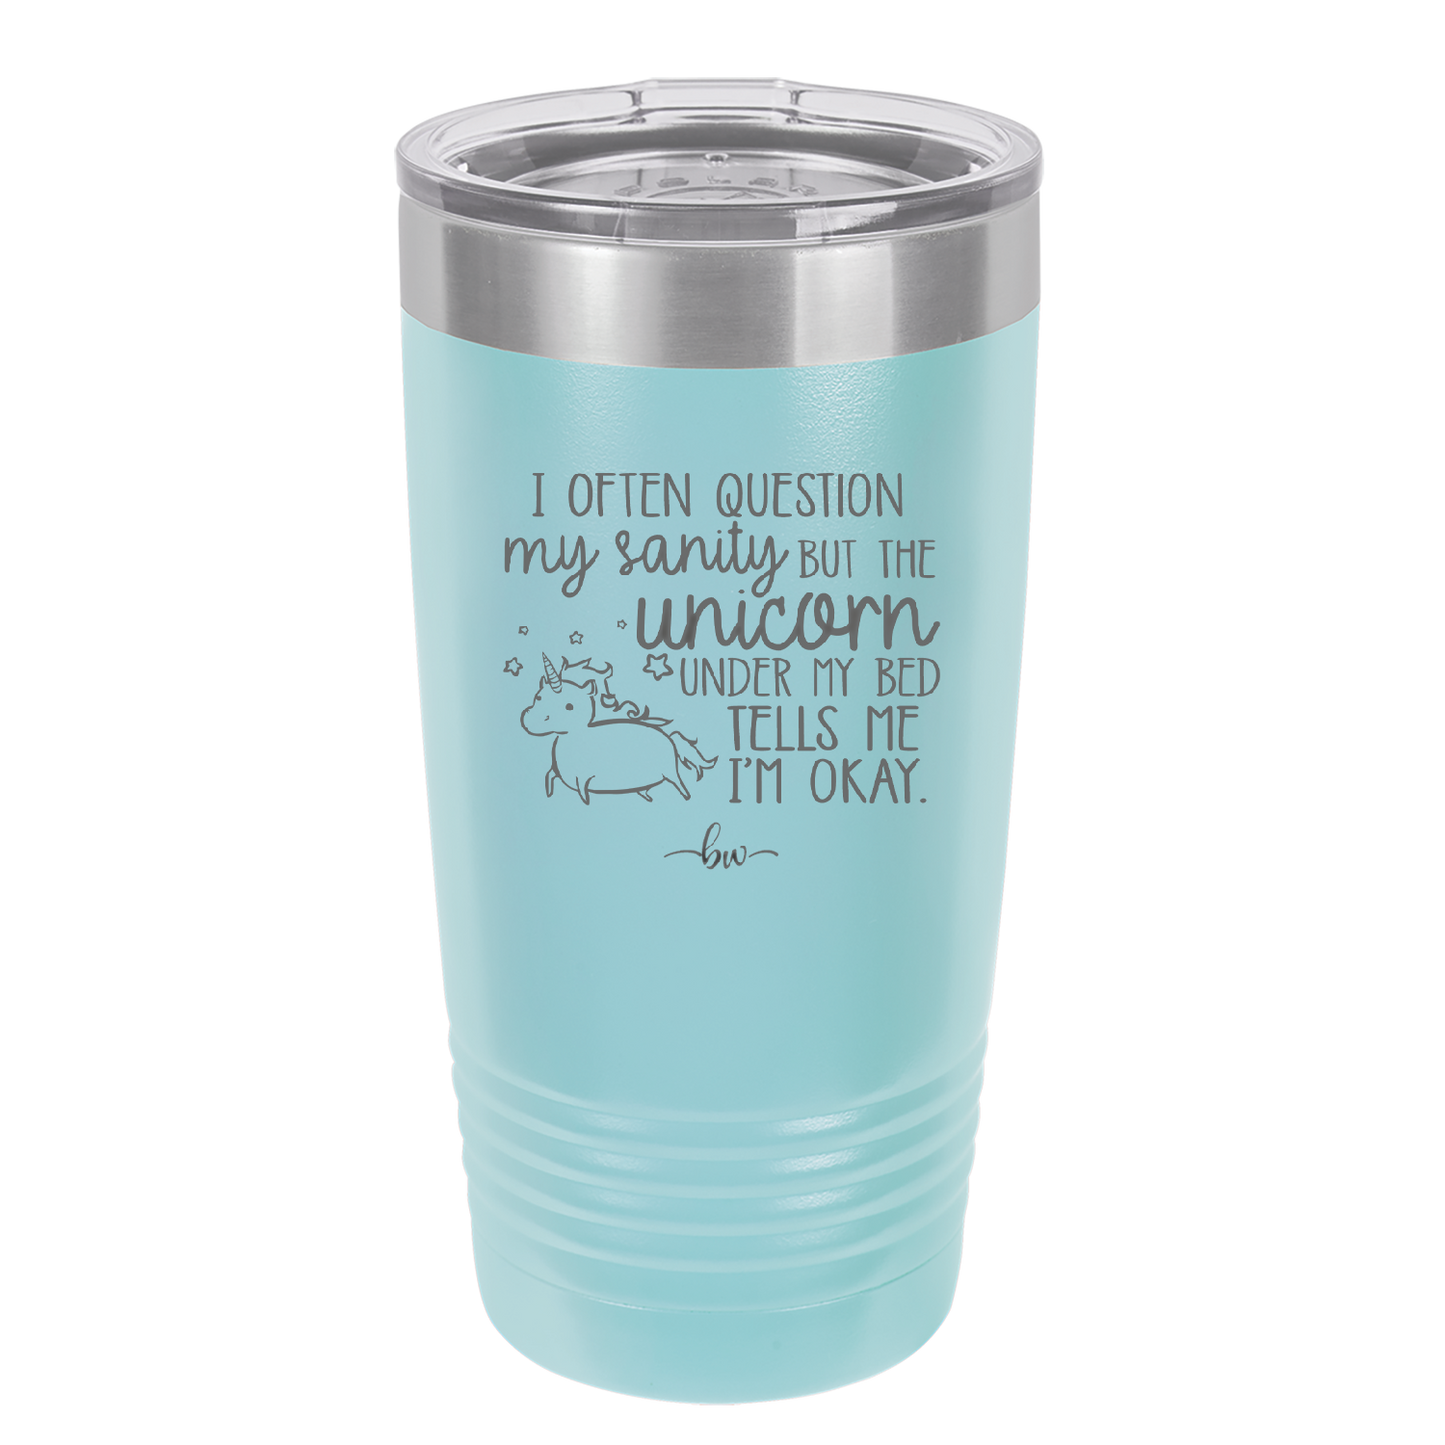 I Often Question My Sanity but the Unicorn Under My Bed Says I'm Okay - Laser Engraved Stainless Steel Drinkware - 2400 -